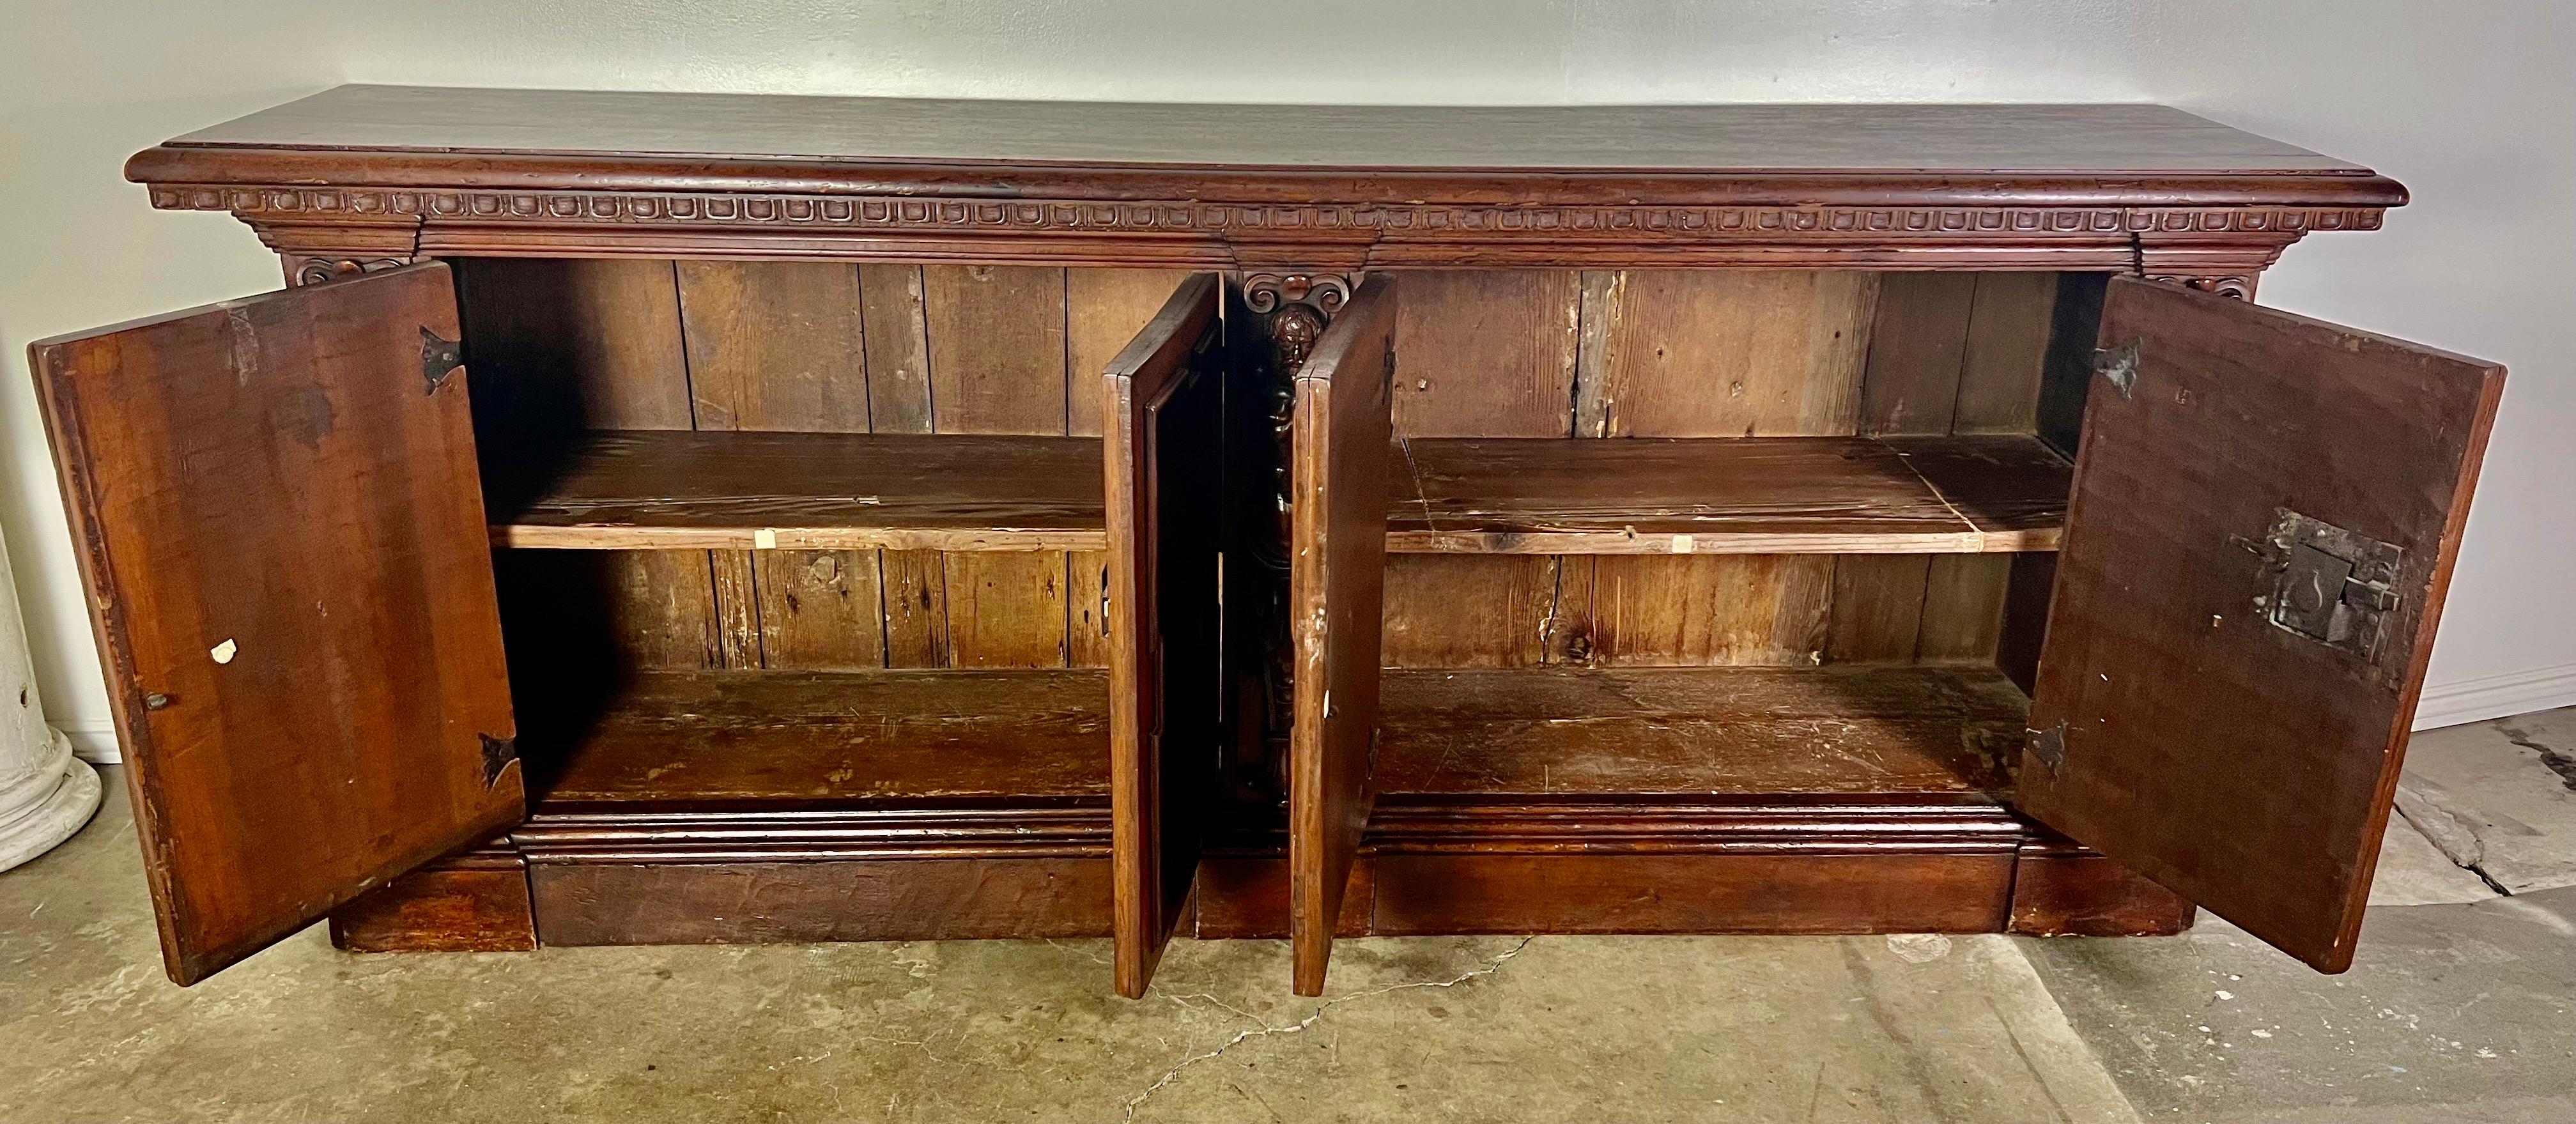 19th Century Walnut Italian Credenza with Intricate Carving Throughout For Sale 5